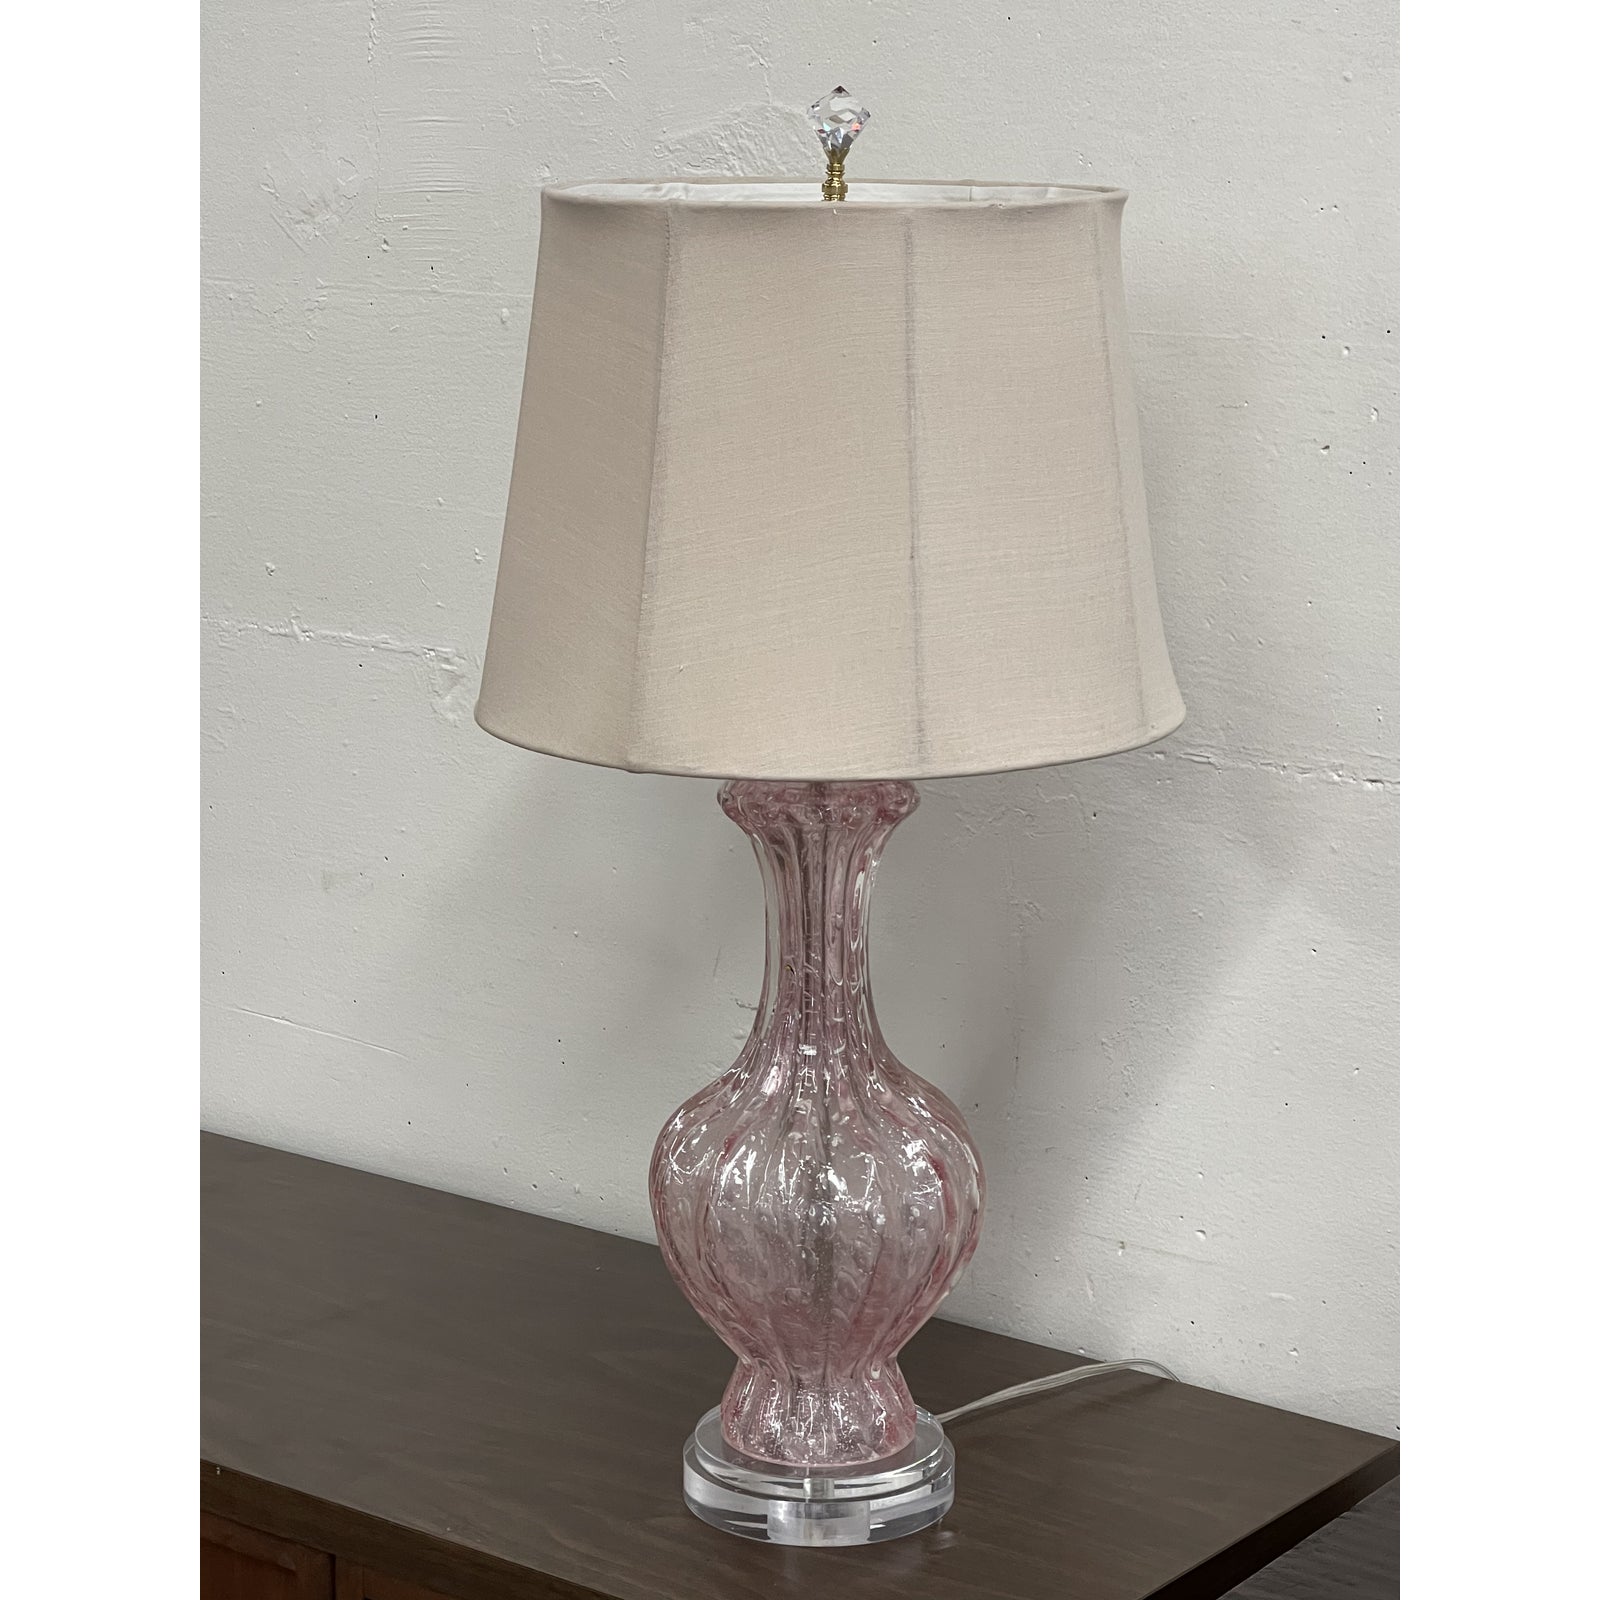 1960s-pink-murano-cotton-candy-lamp-7779